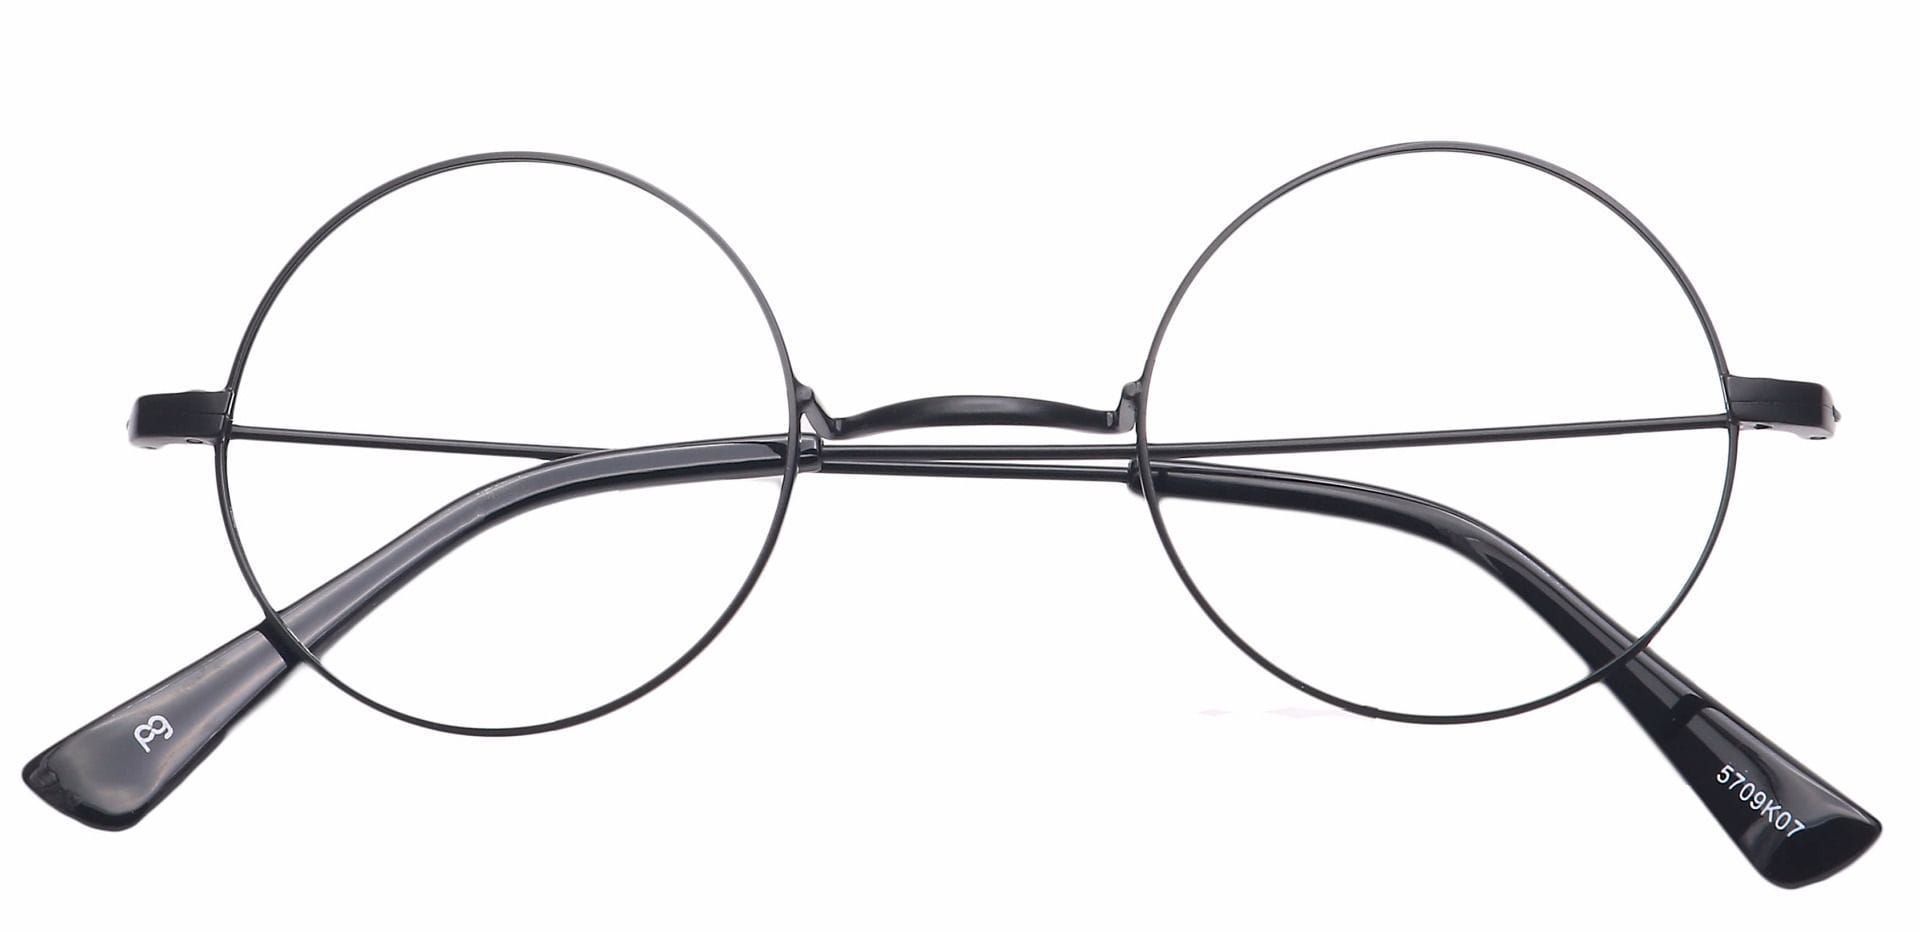 A pair of glasses with black, rounded frames.